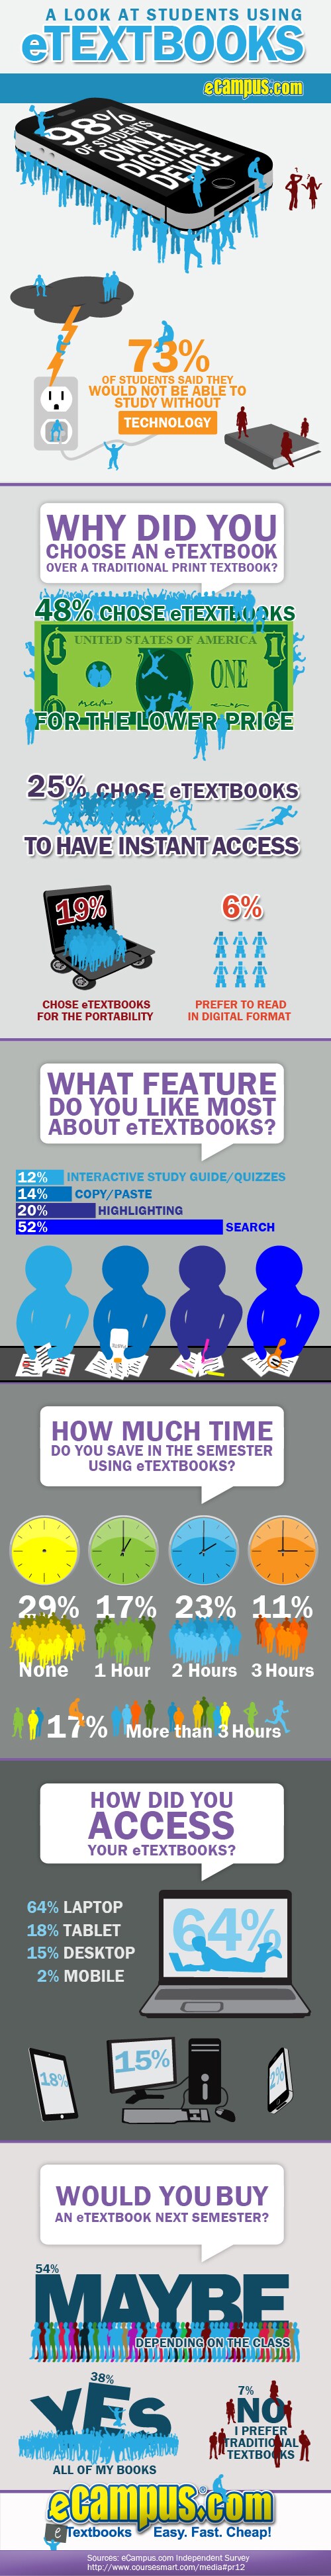 A Look at Students Using eTextbooks (Infographic)